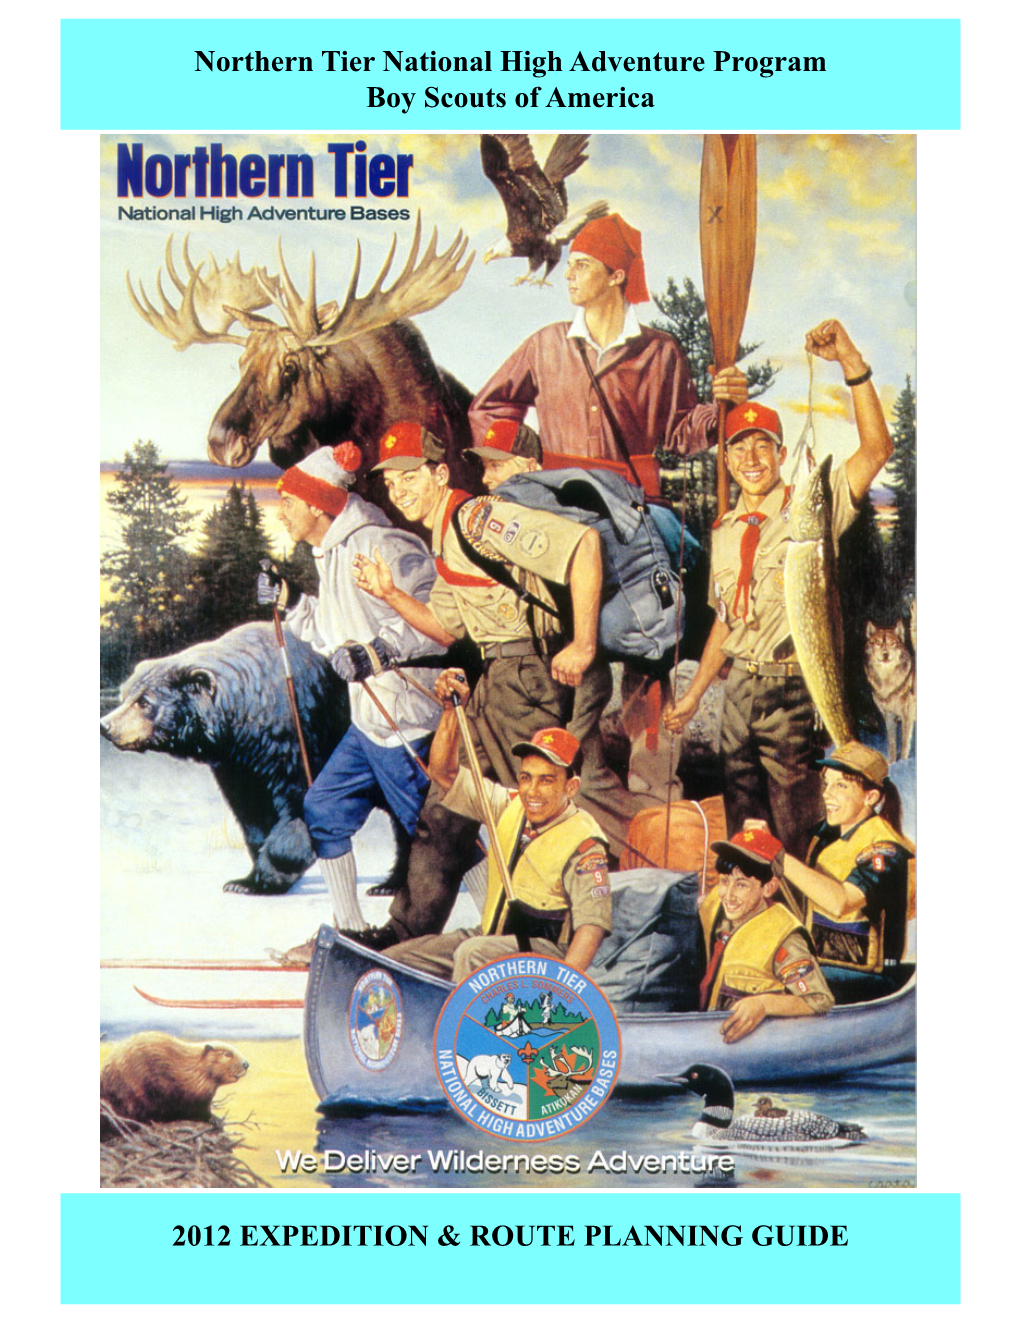 Northern Tier National High Adventure Program Boy Scouts of America